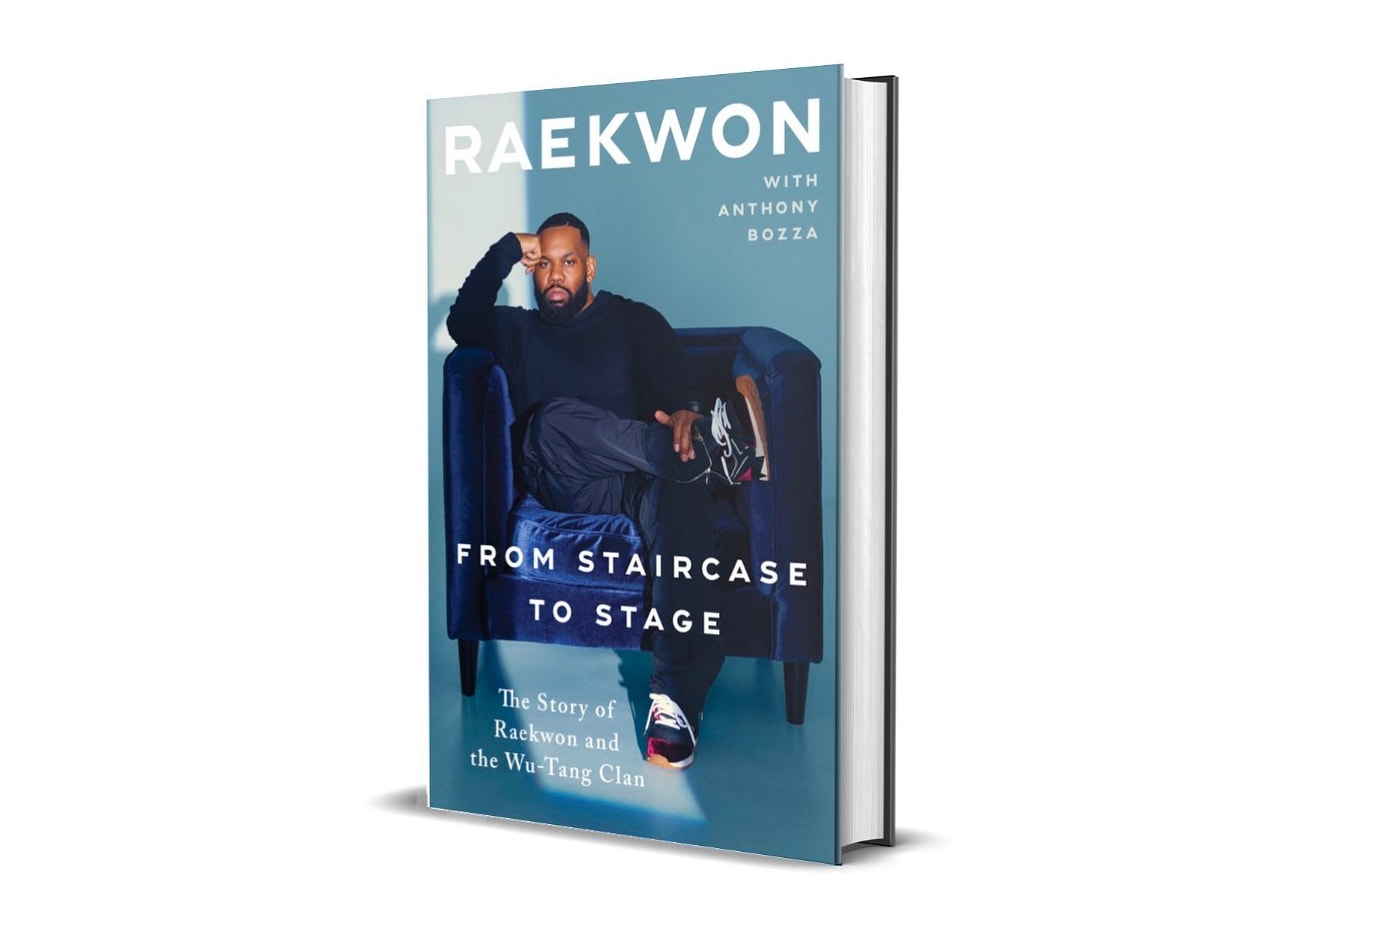 Raekwon From Staircase to Stage Memoir Release info THE STORY OF RAEKWON AND THE WU-TANG CLAN